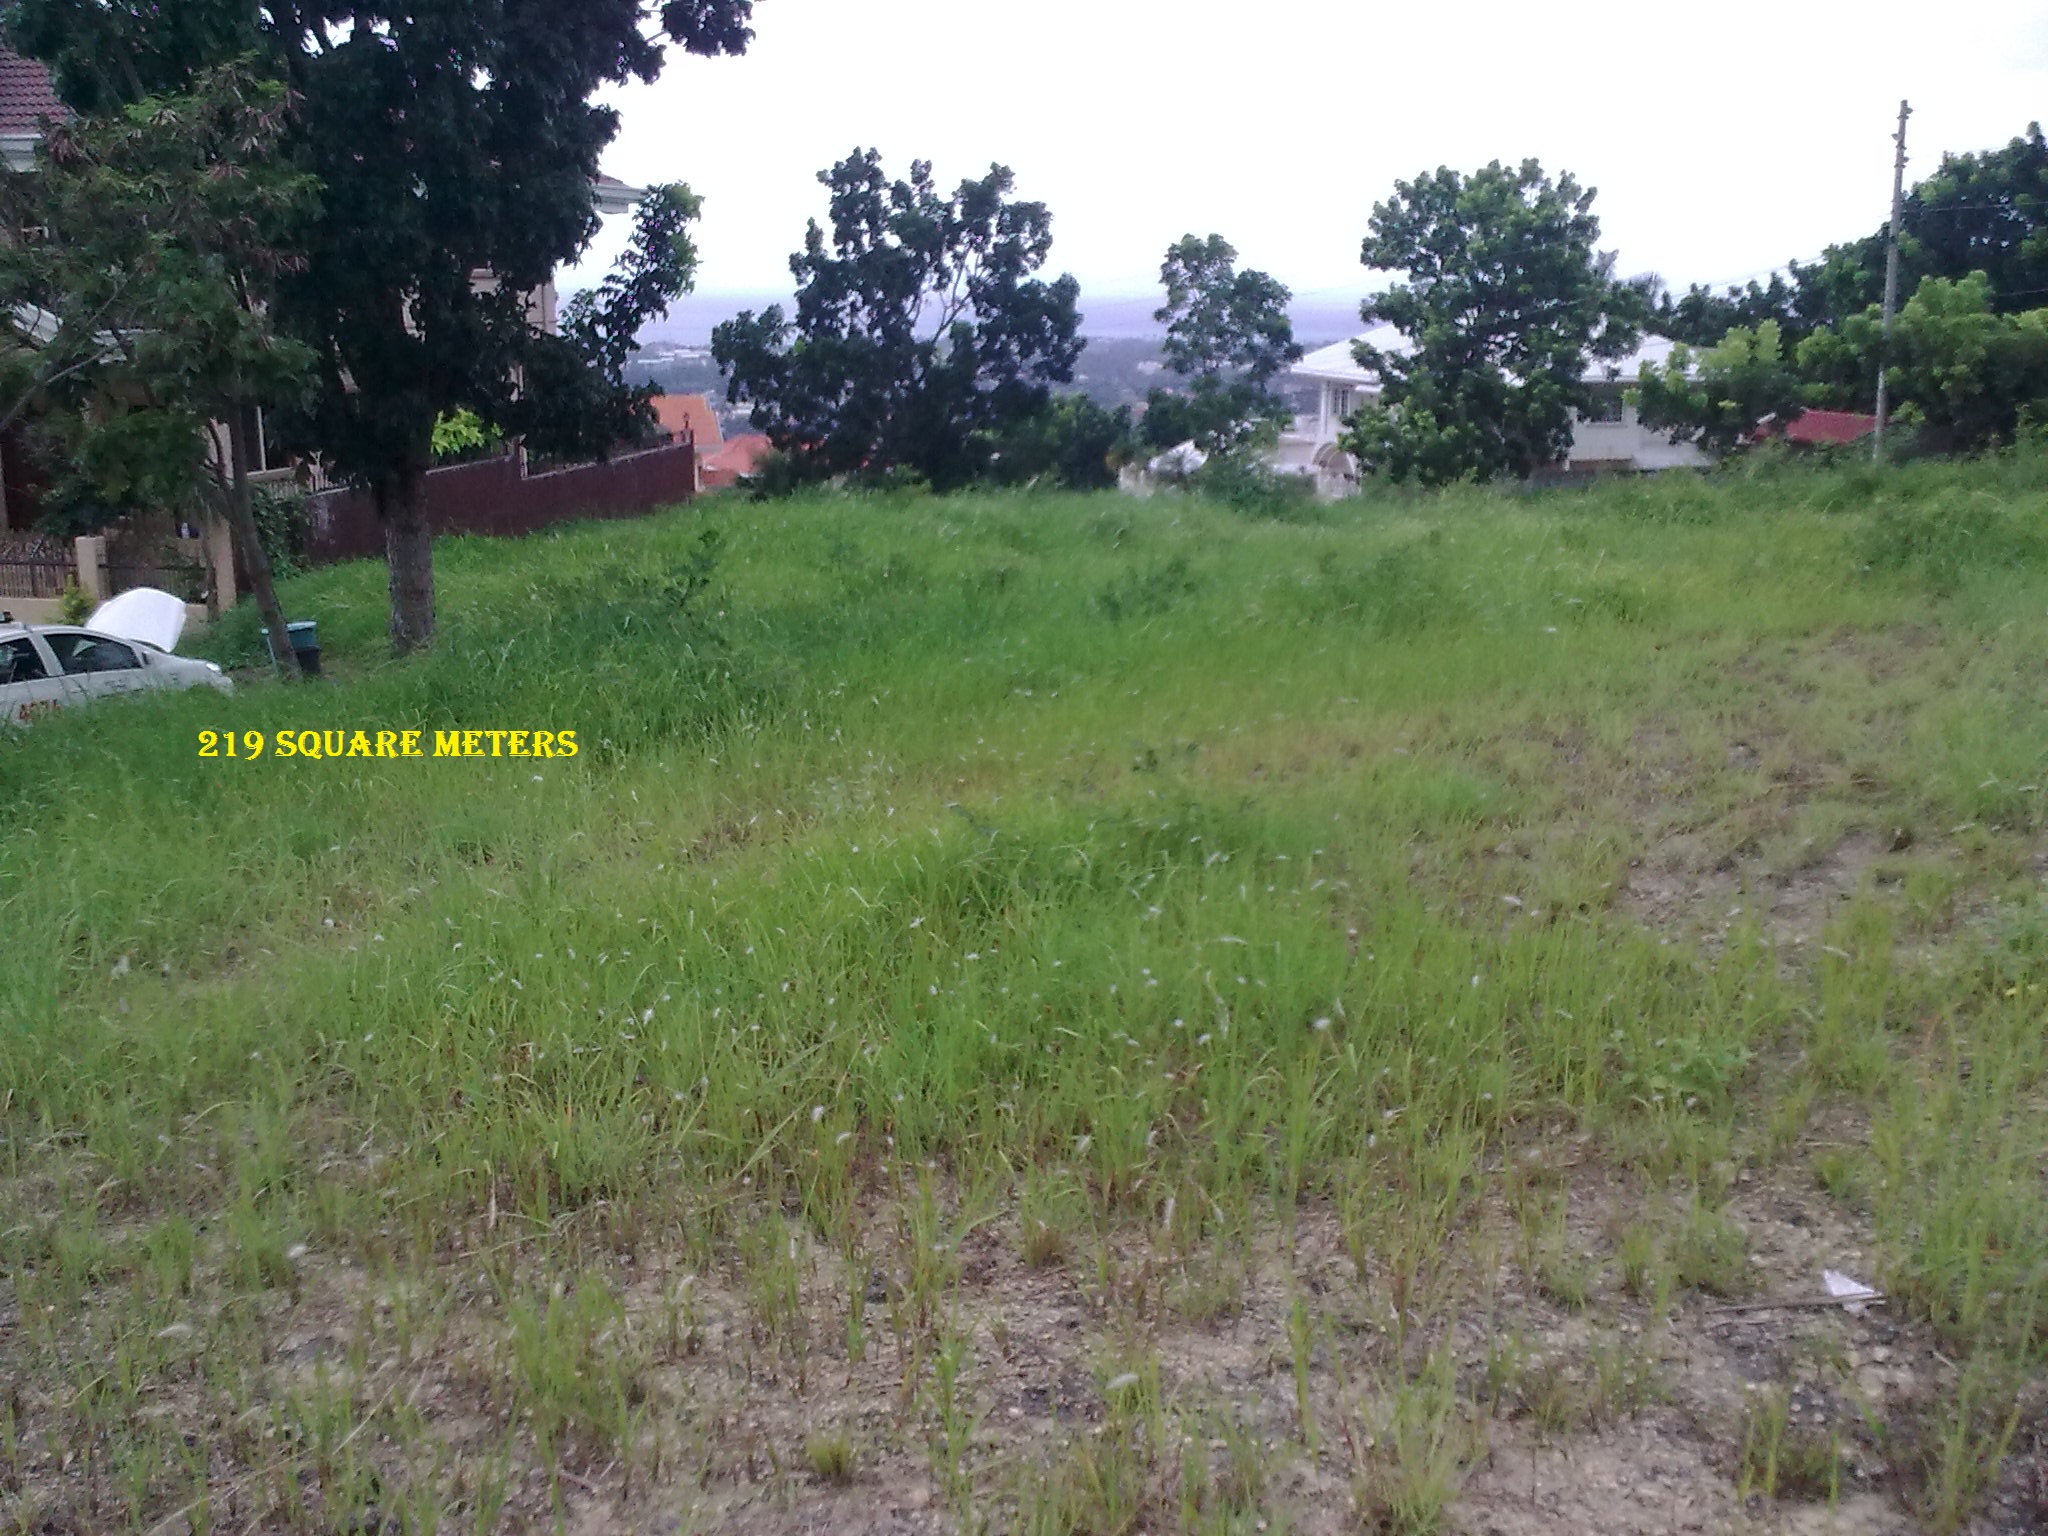 RESALE LOT @ VISTA GRANDE SUBD, PH 1 Lot for sale Vista Grande Subd. Phase1, Bulacao Talisay City, Cebu, BLk 10, LOT # .23, LOT AREA 219sq.m.@ P 8,500/sq.m. P1,861,500.00  It is Located at Col de sac, before club house, which is existing Home Owners Assoc